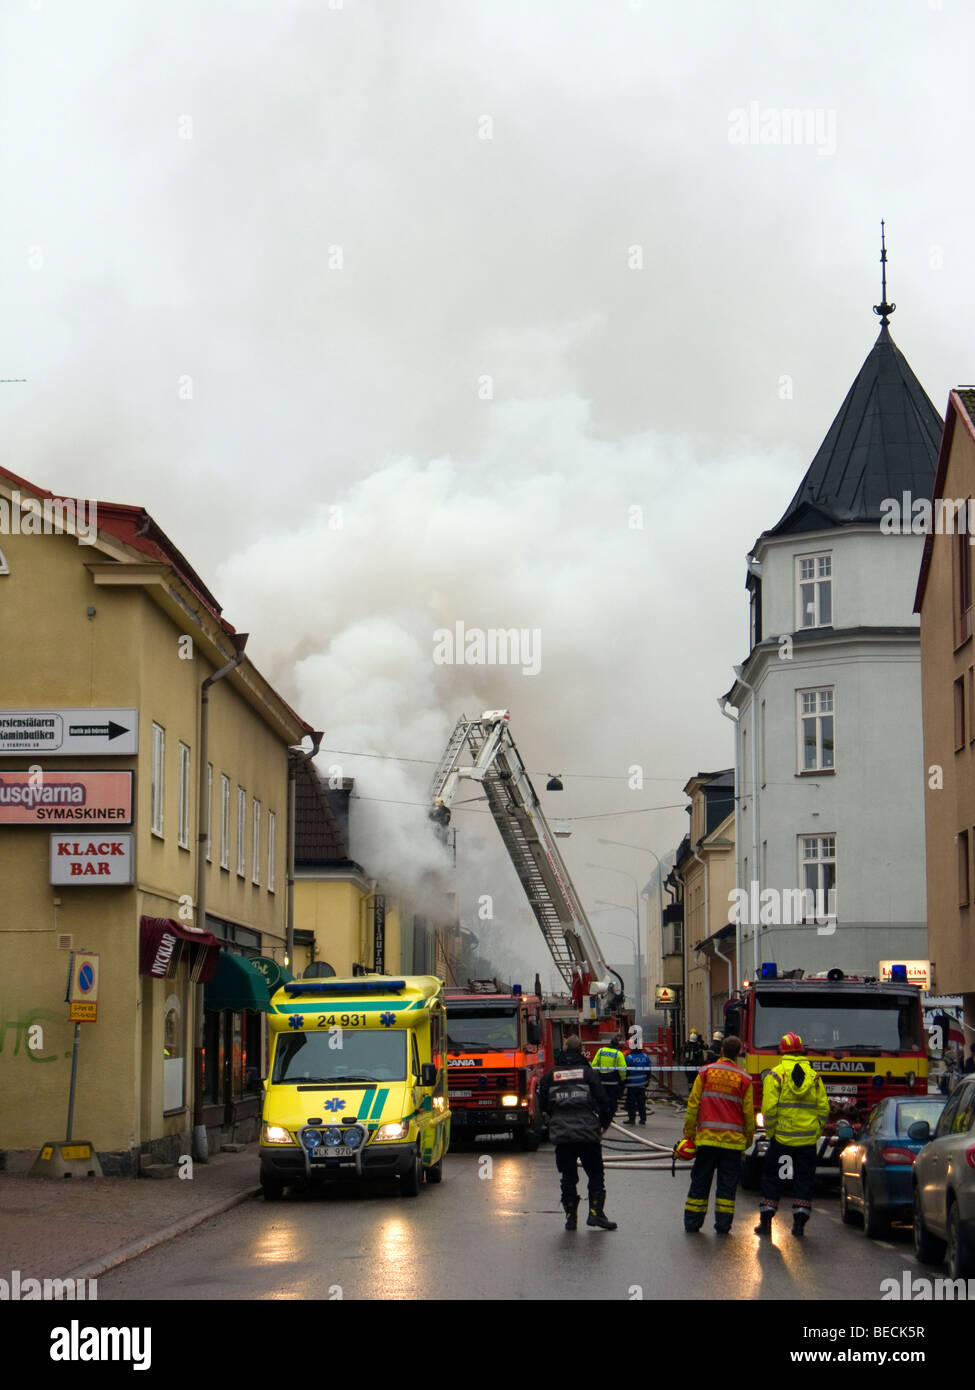 Firemen fighting the fire at Blue Moon Bar in Nyköping, Sweden Stock Photo